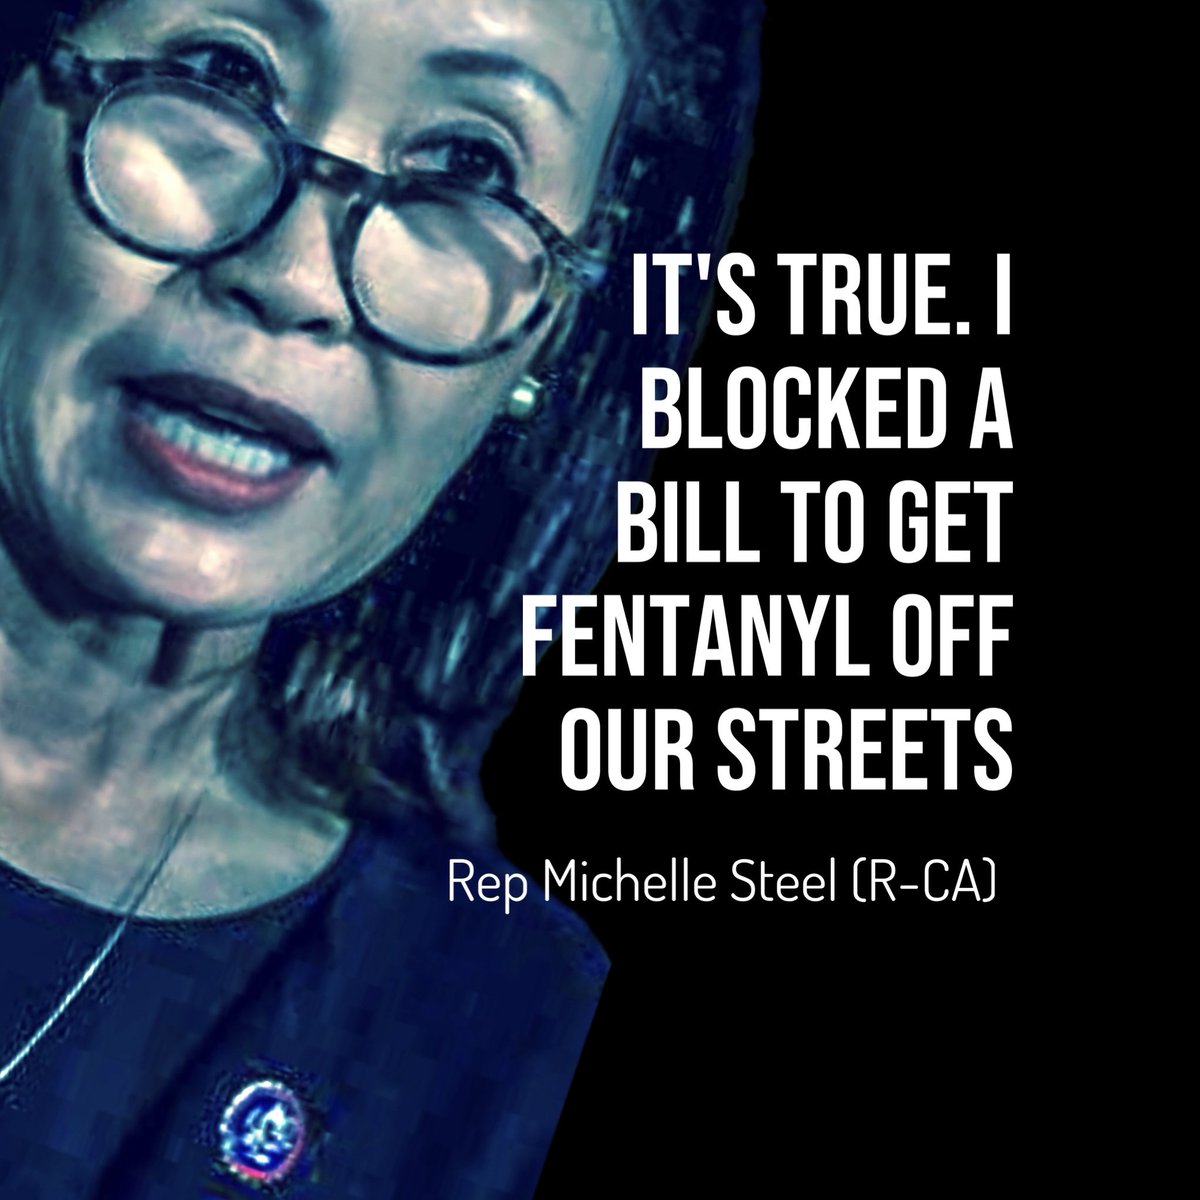 Today is a good day to remind you that Rep Michelle Steel #CA45 is blocking a bipartisan bill that 18,000 border patrol agents say is critical to getting fentanyl off our streets 

ELECT @derektranCA45 
He'll do the right thing